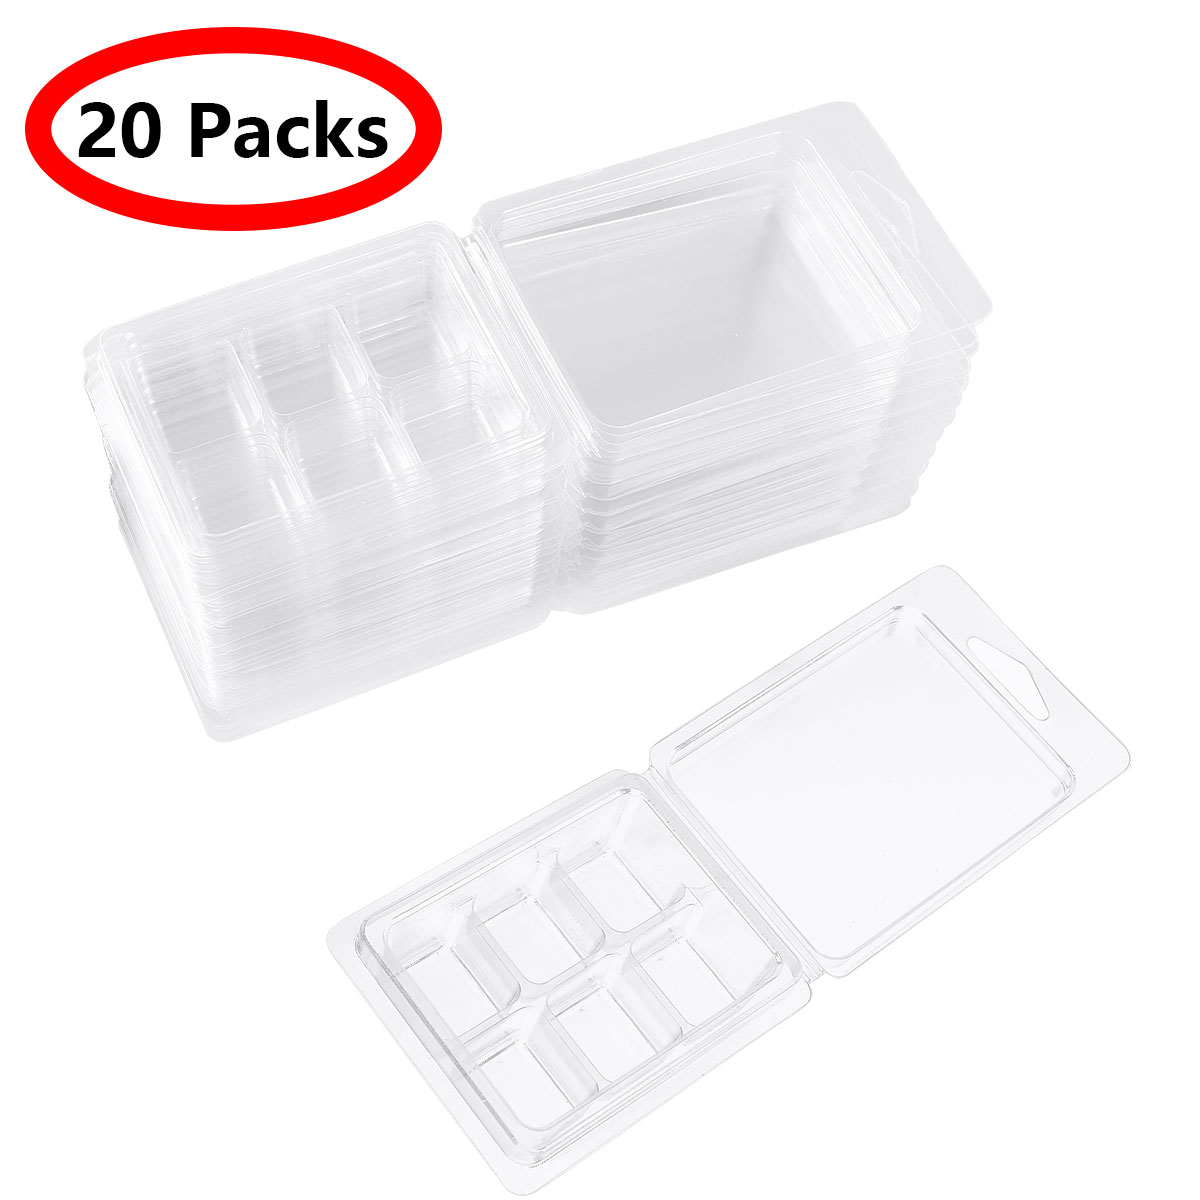 20pcs Soap Wax Melt Molds 6 Cell Clamshell Packaging Molds Empty Plastic Wax Melt Clamshells for Wickless Wax Melt Candles Boxes